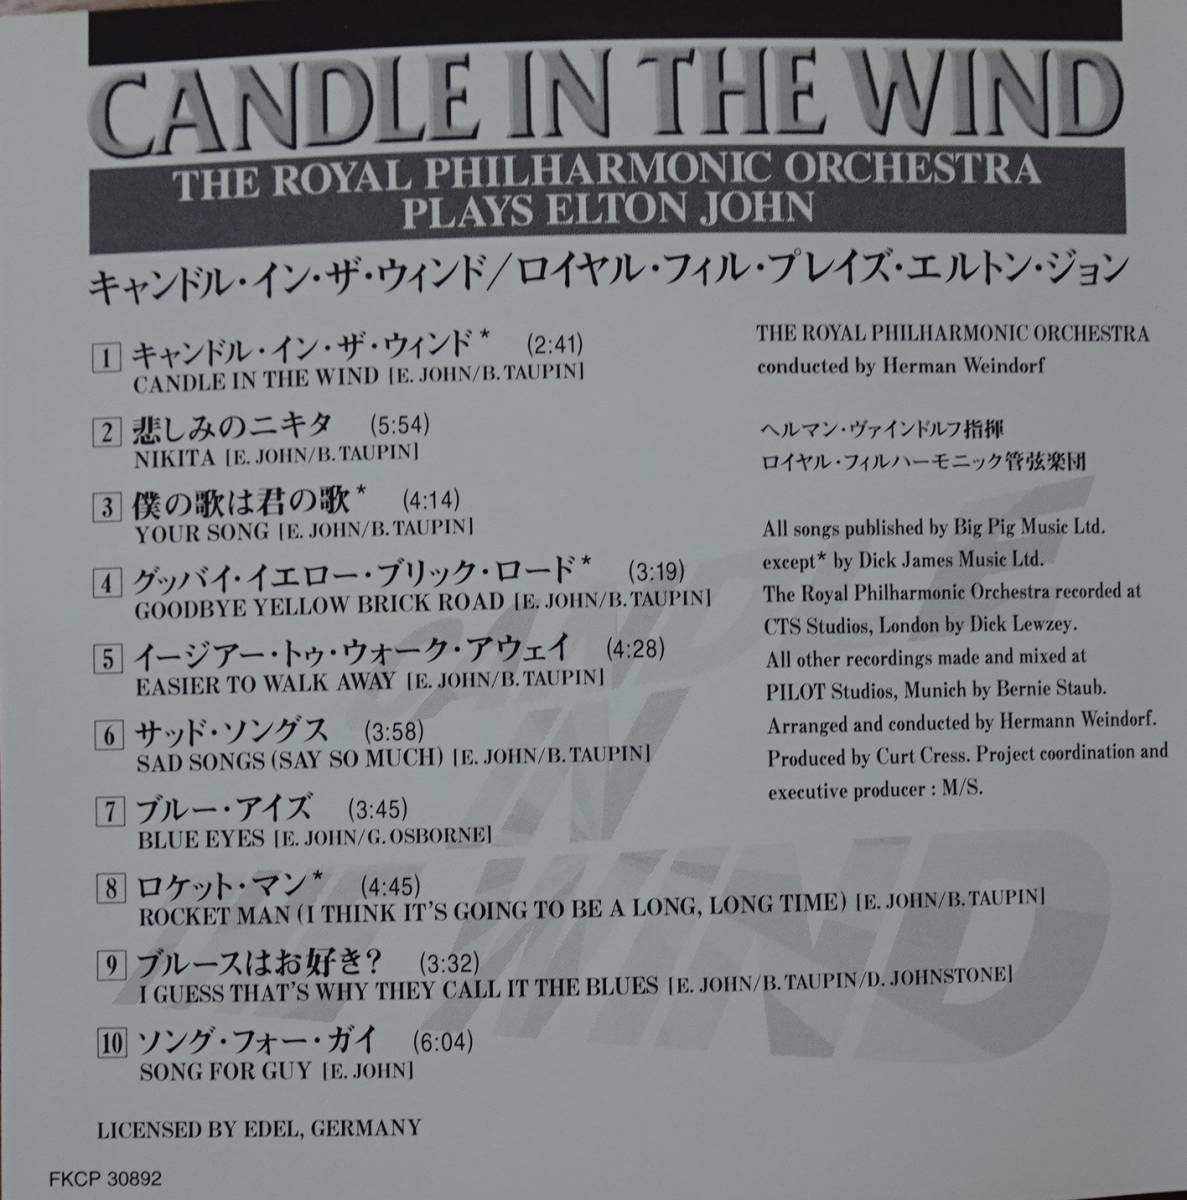 USED CD★Candle In The Wind/ロイヤル・フィルズ・プレイズ・エルトン・ジョン★THE ROYAL PHILHARMONIC ORCHESTRA PLAYS ELTON JOHN 10曲_画像10